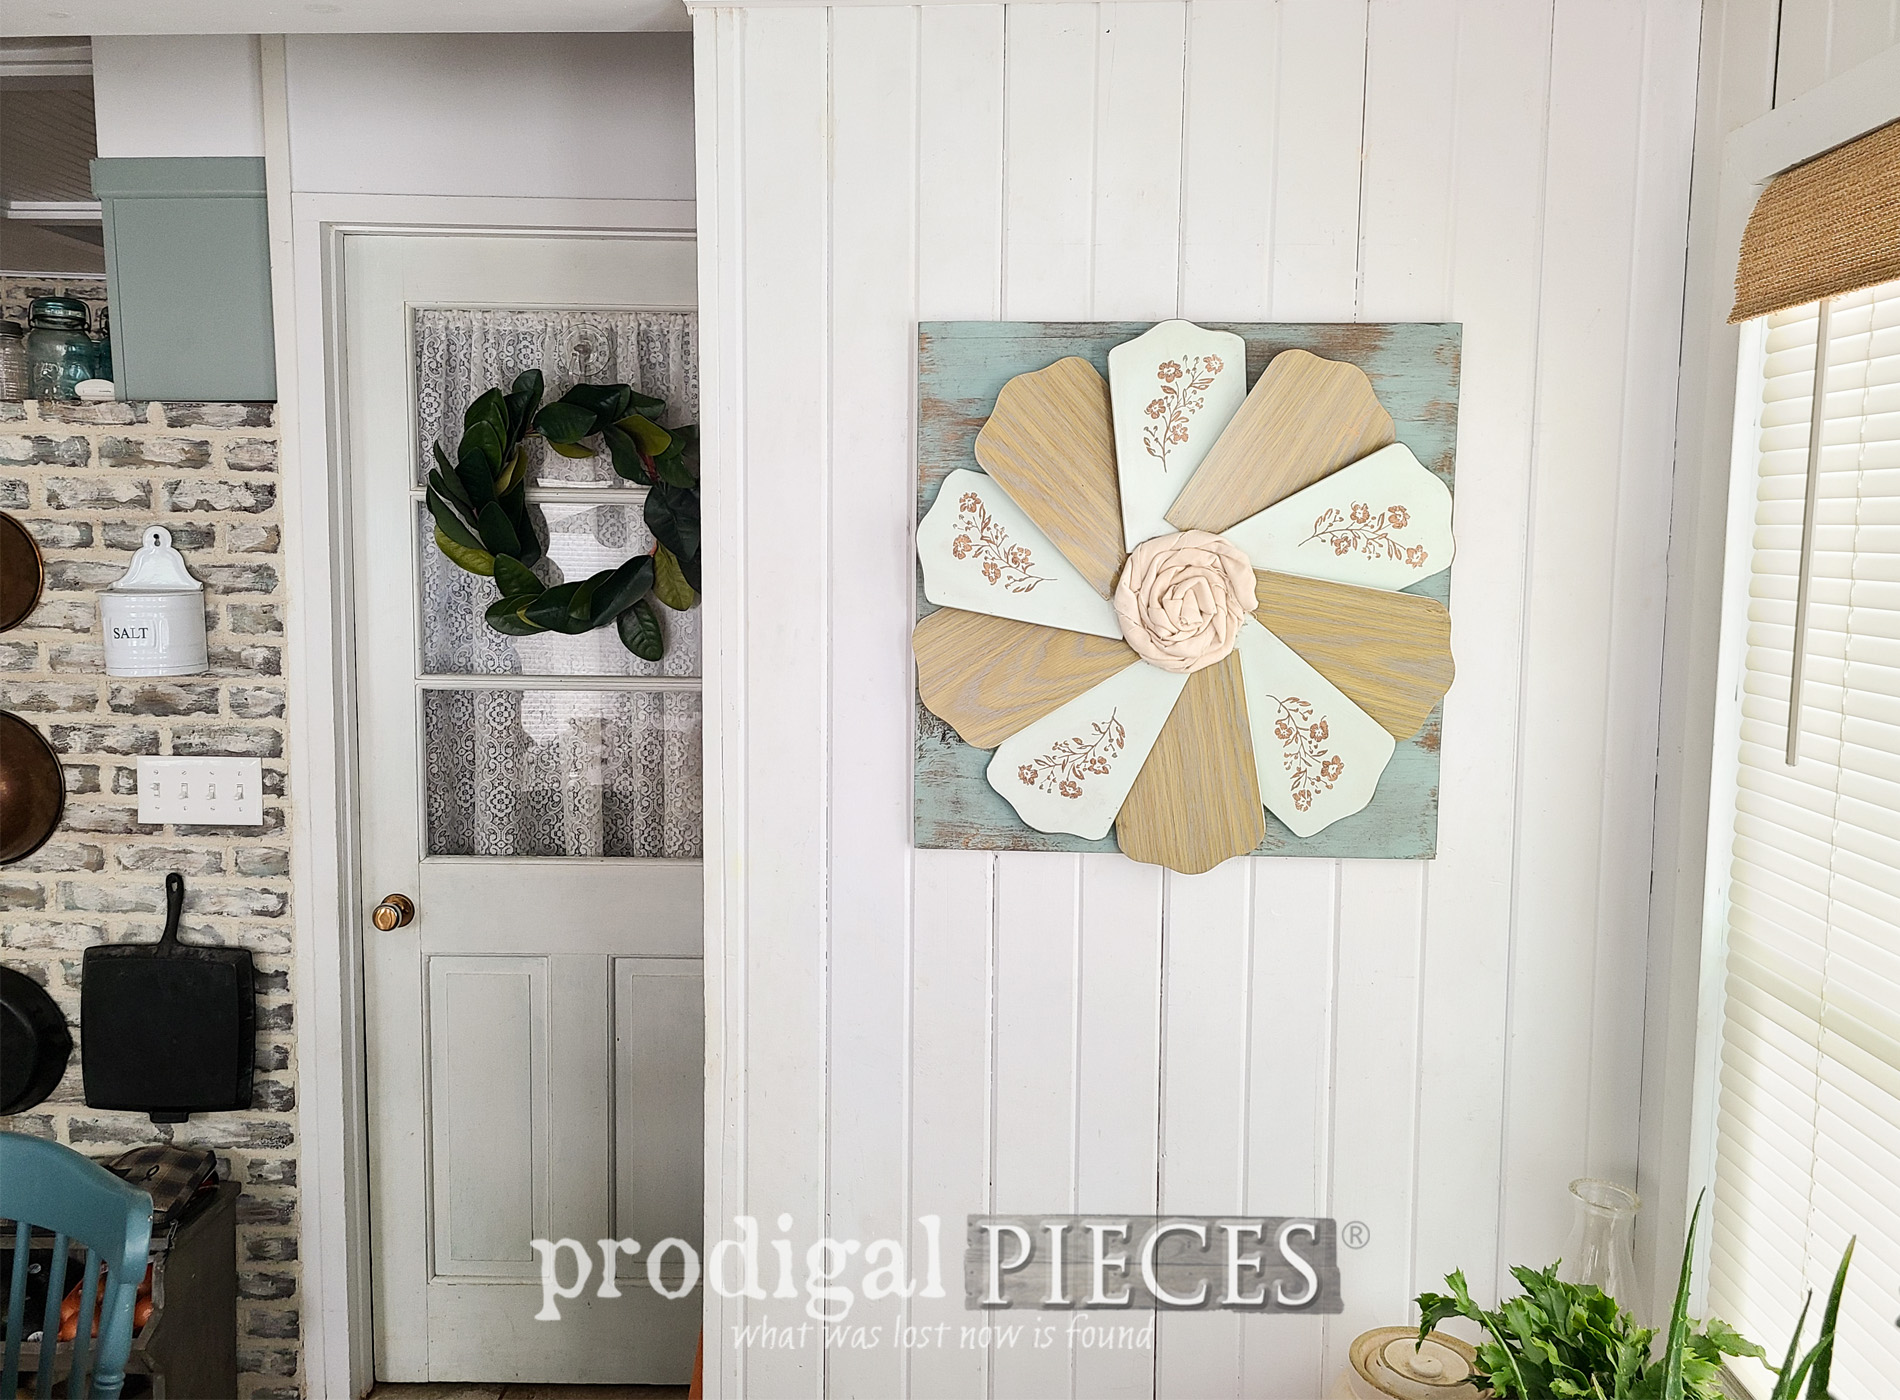 Take those upcycled fan blades and create a farmhouse daisy flower | by Prodigal Pieces | prodigalpieces.com #prodigalpieces #farmhouse #upcycled #diy